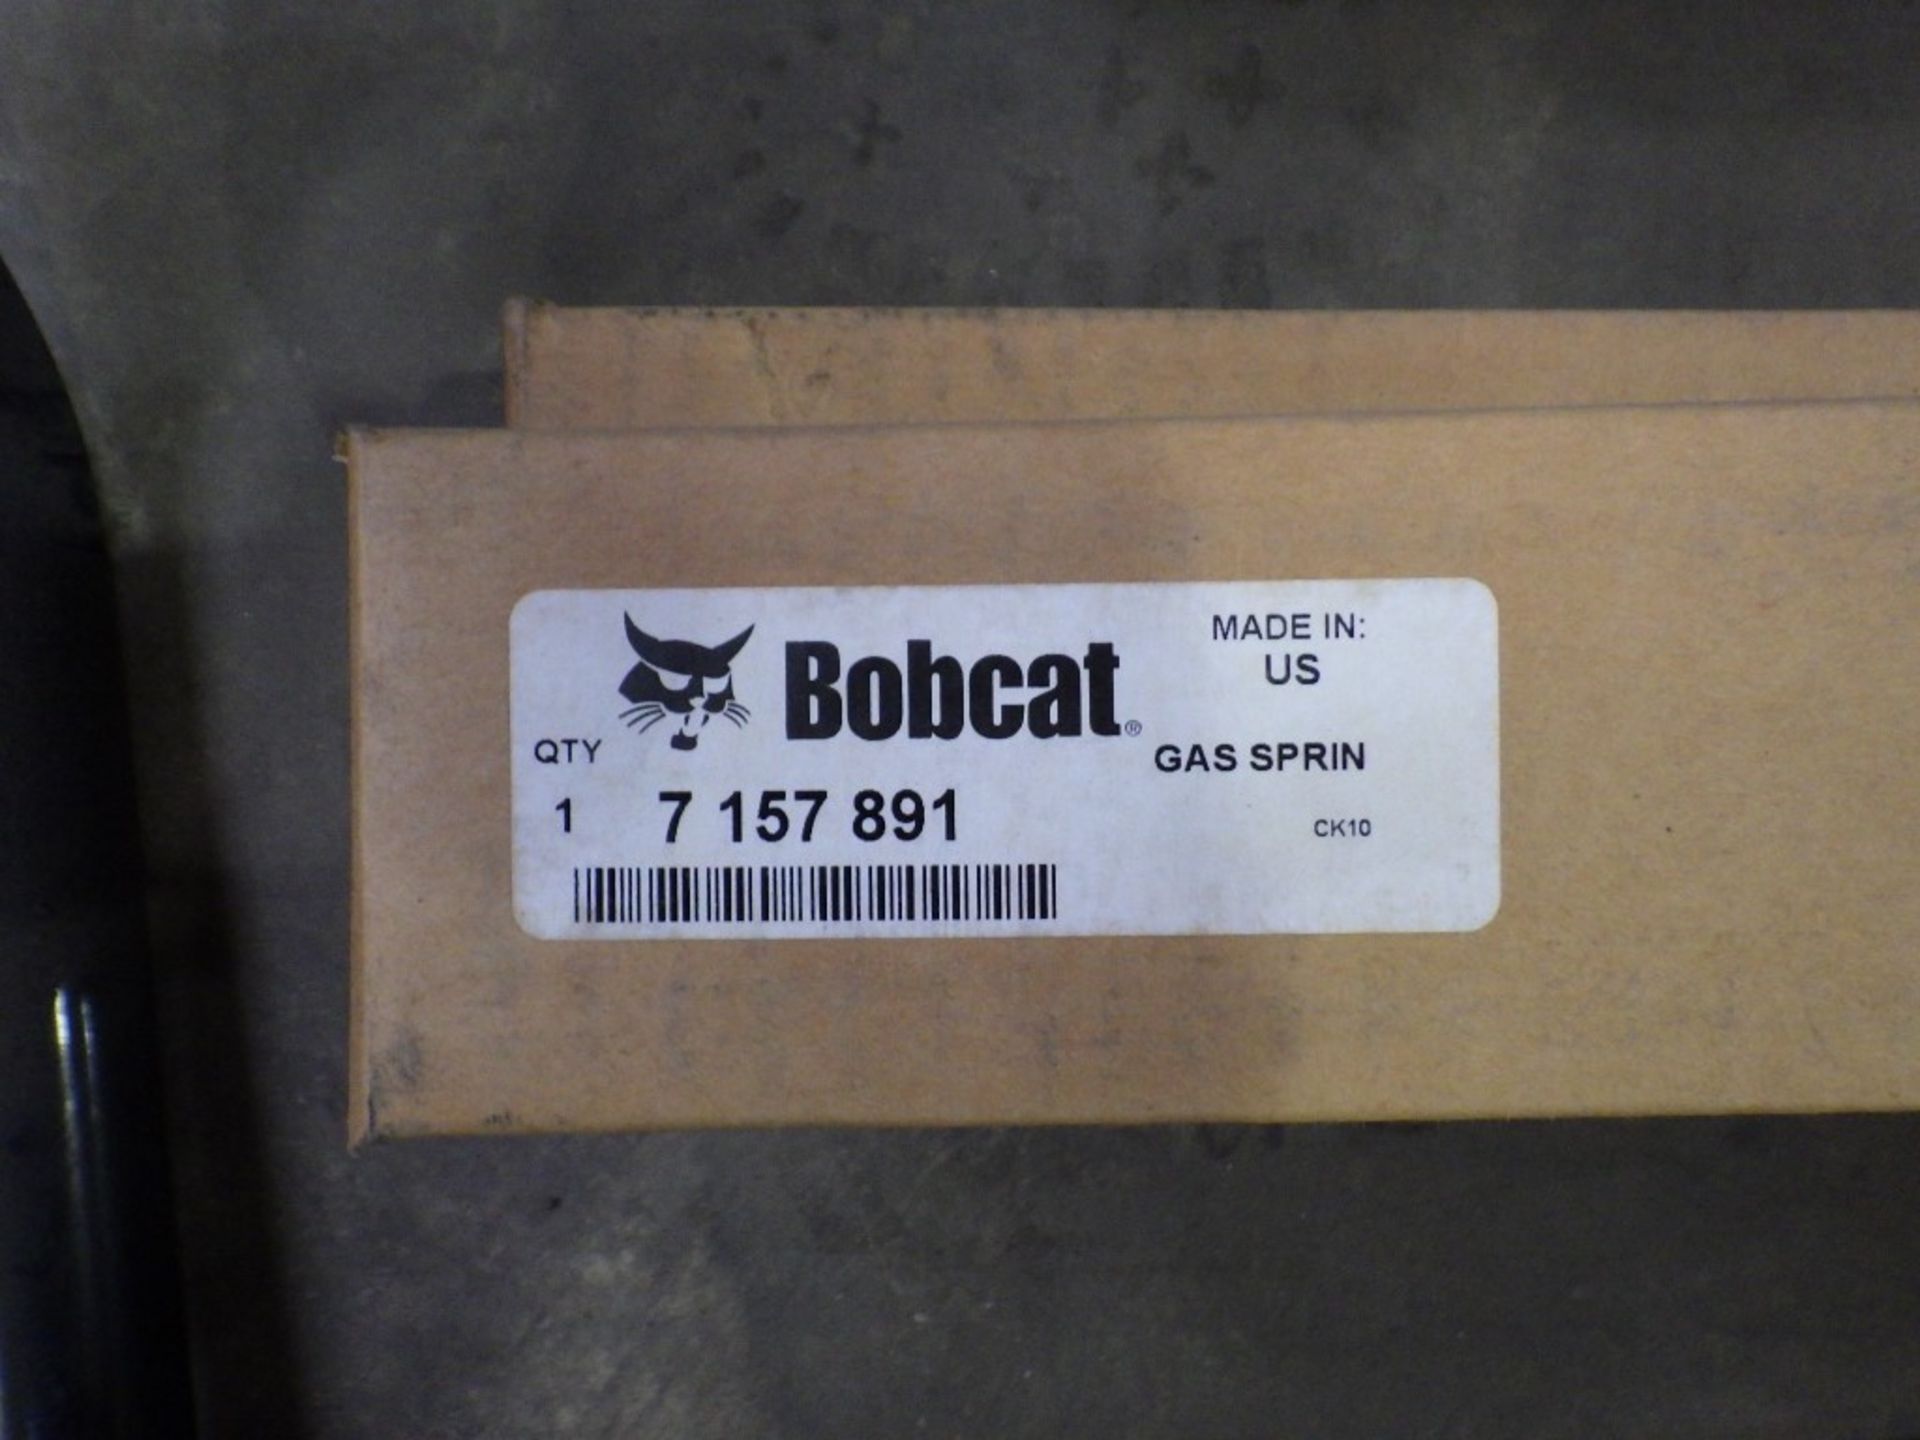 ASSORTED BOBCAT PARTS INCL. SAFETY FRAME / BARS, SEAT BELT, GAS STRUTS, HANDLES, LATCHES, NUTS, - Image 7 of 11